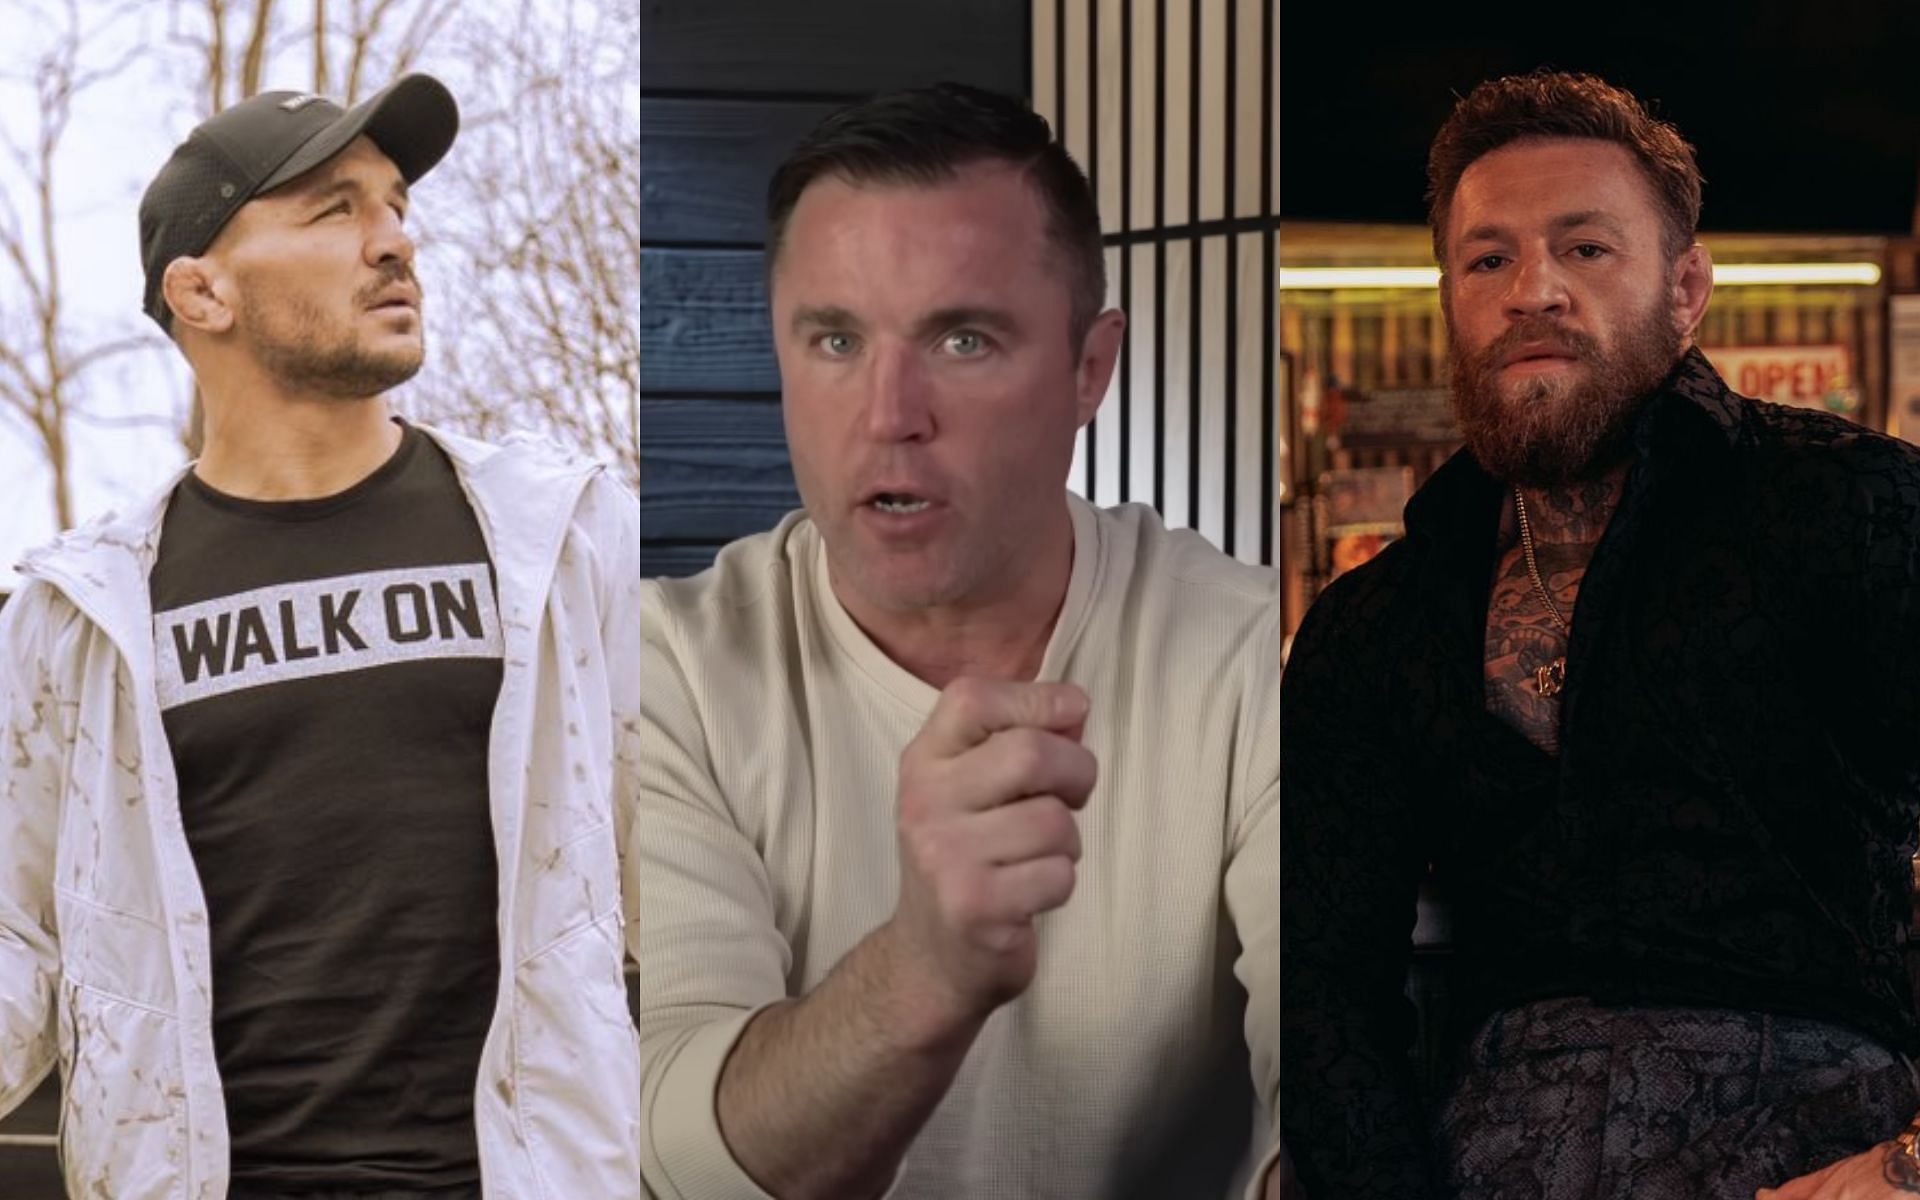 Chael Sonnen [Middle] disputes claim regarding Michael Chandler [Left] and Conor McGregor [Right] fighting for 165-pound title [Image courtesy: Chael Sonnen - YouTube, and @MikeChandlerMMA and @TheNotoriousMMA - X]